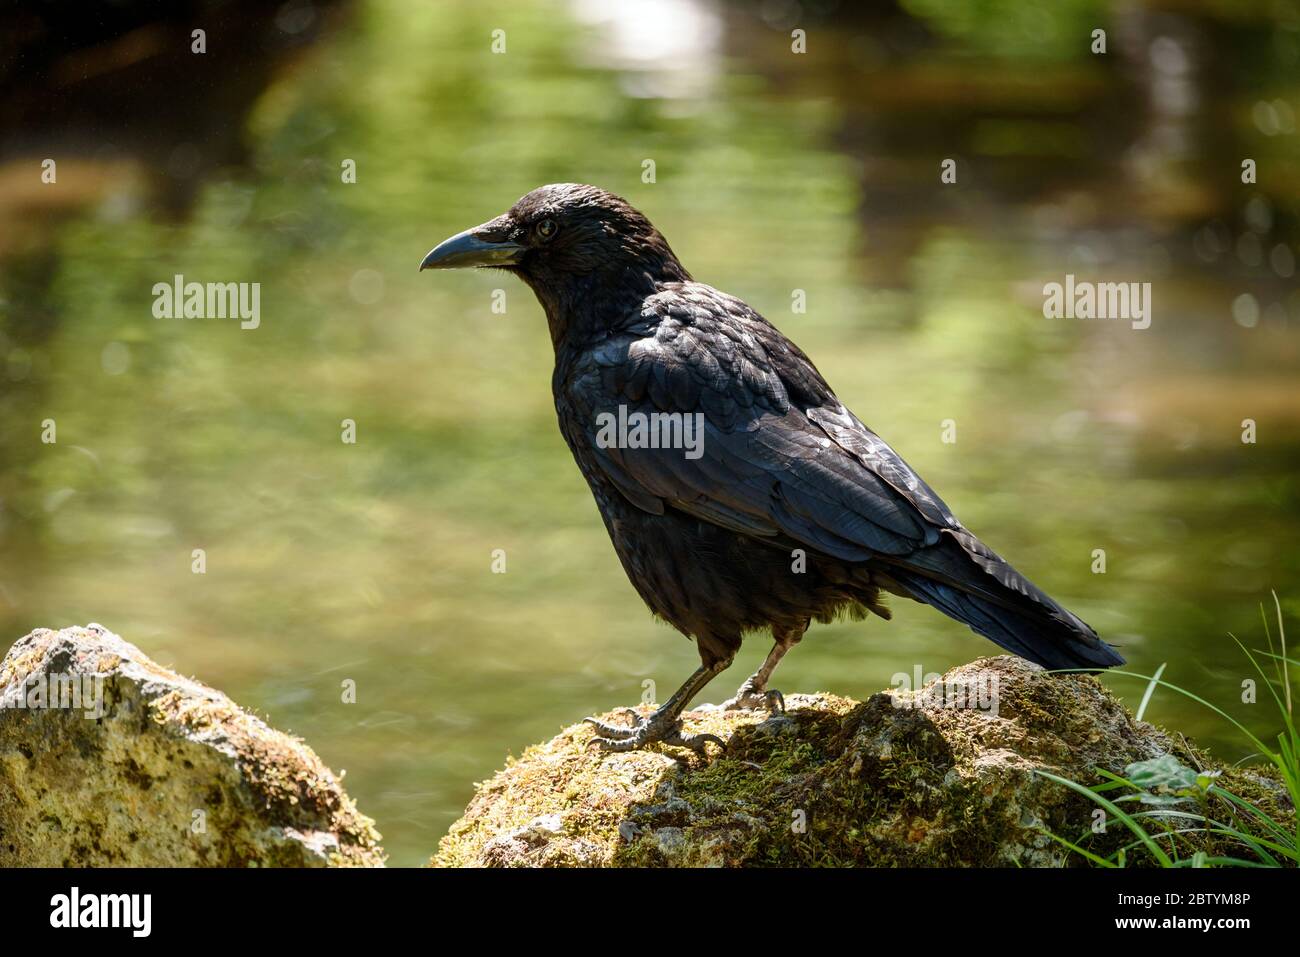 Carrion crow (corvus corone) perched on a rock in a forest. Stock Photo